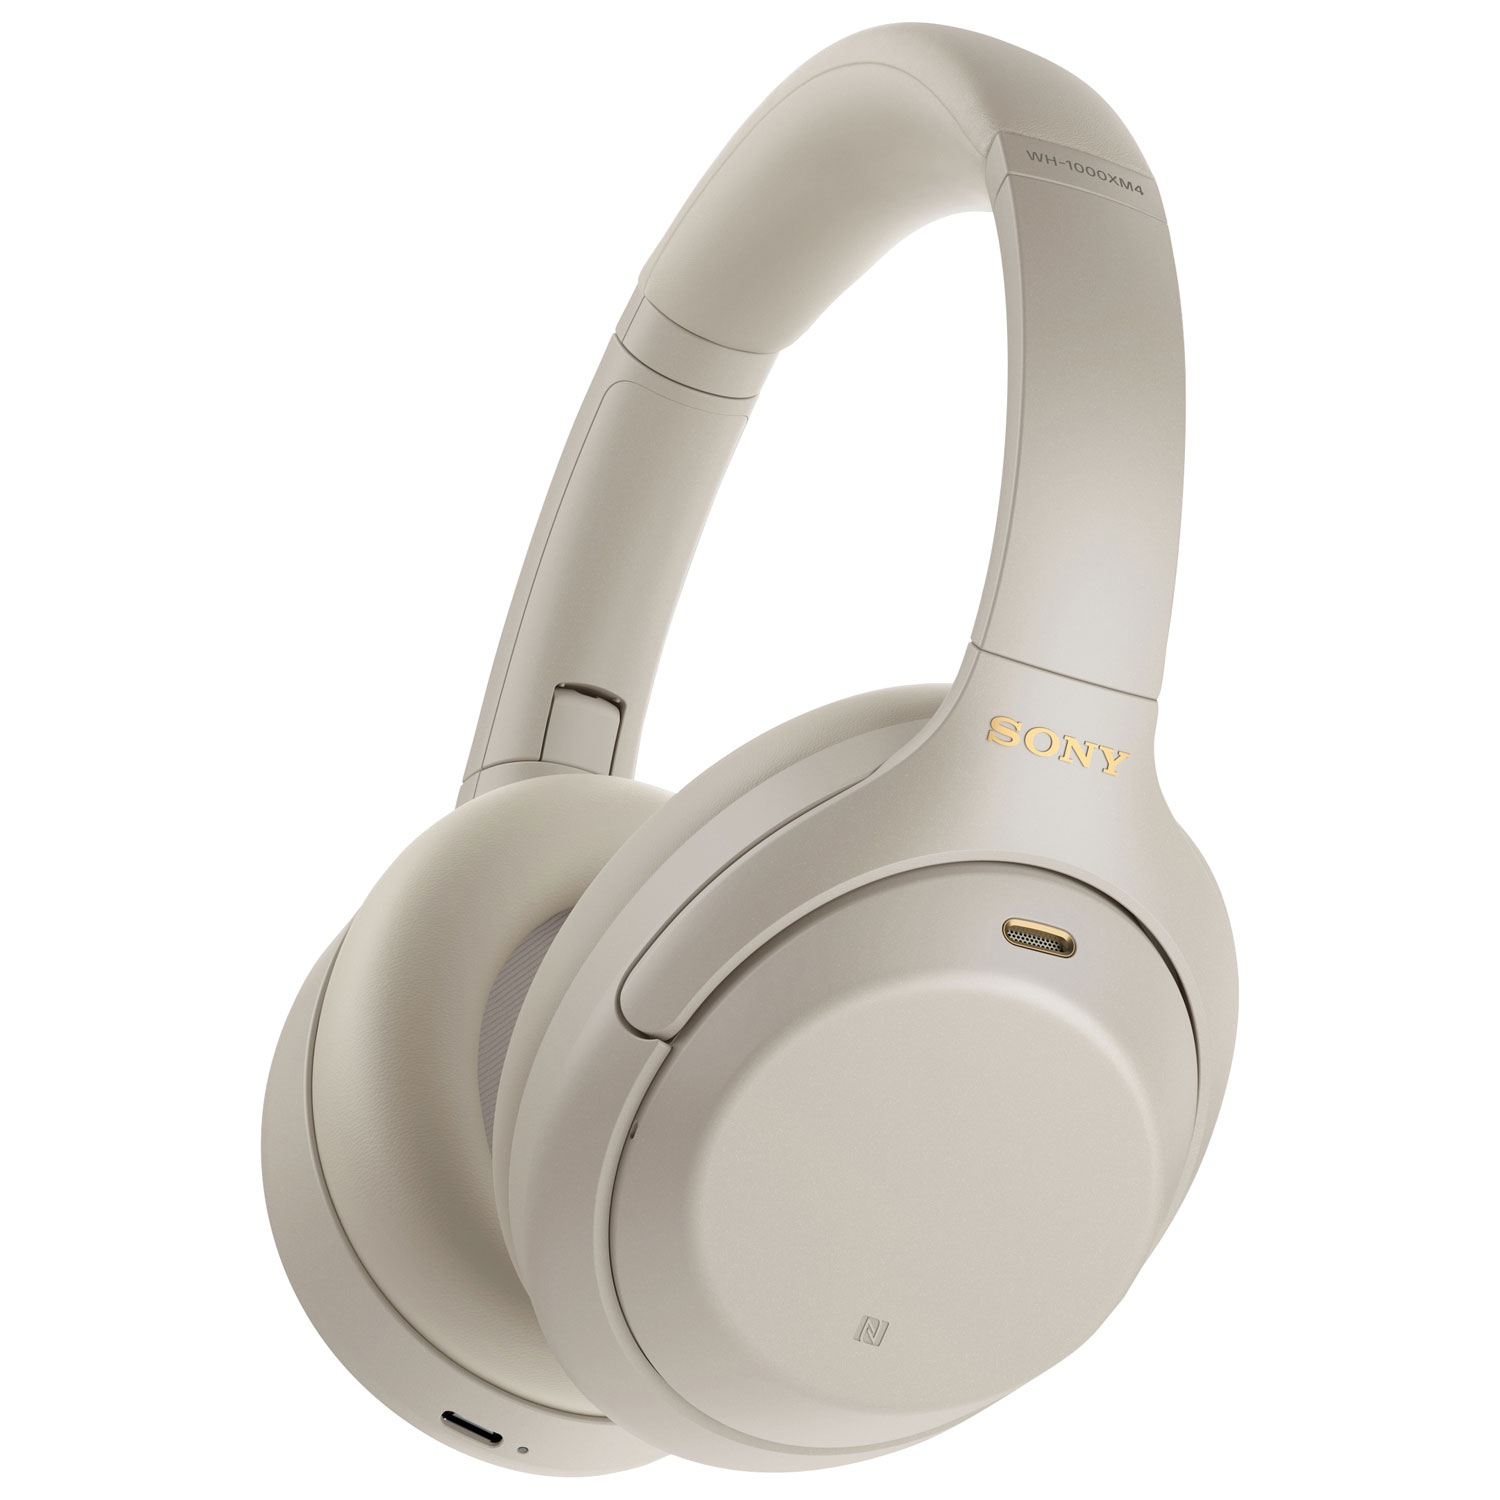 Sony WH-1000XM4 Over-Ear Noise Cancelling Bluetooth Headphones - Platinum Silver